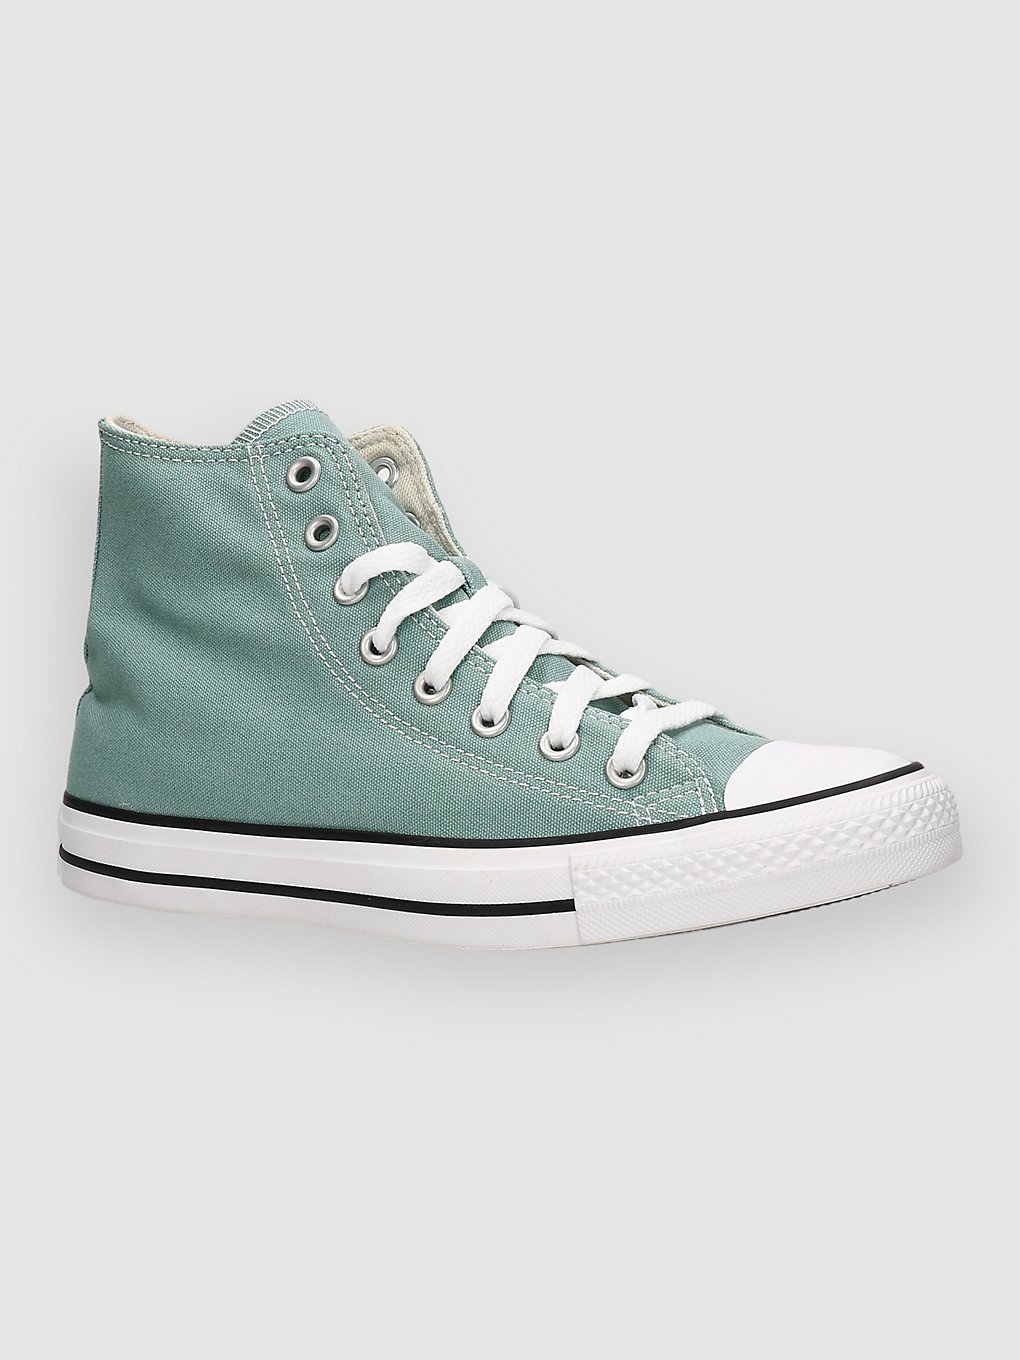 converse chuck taylor all star sneakers herby